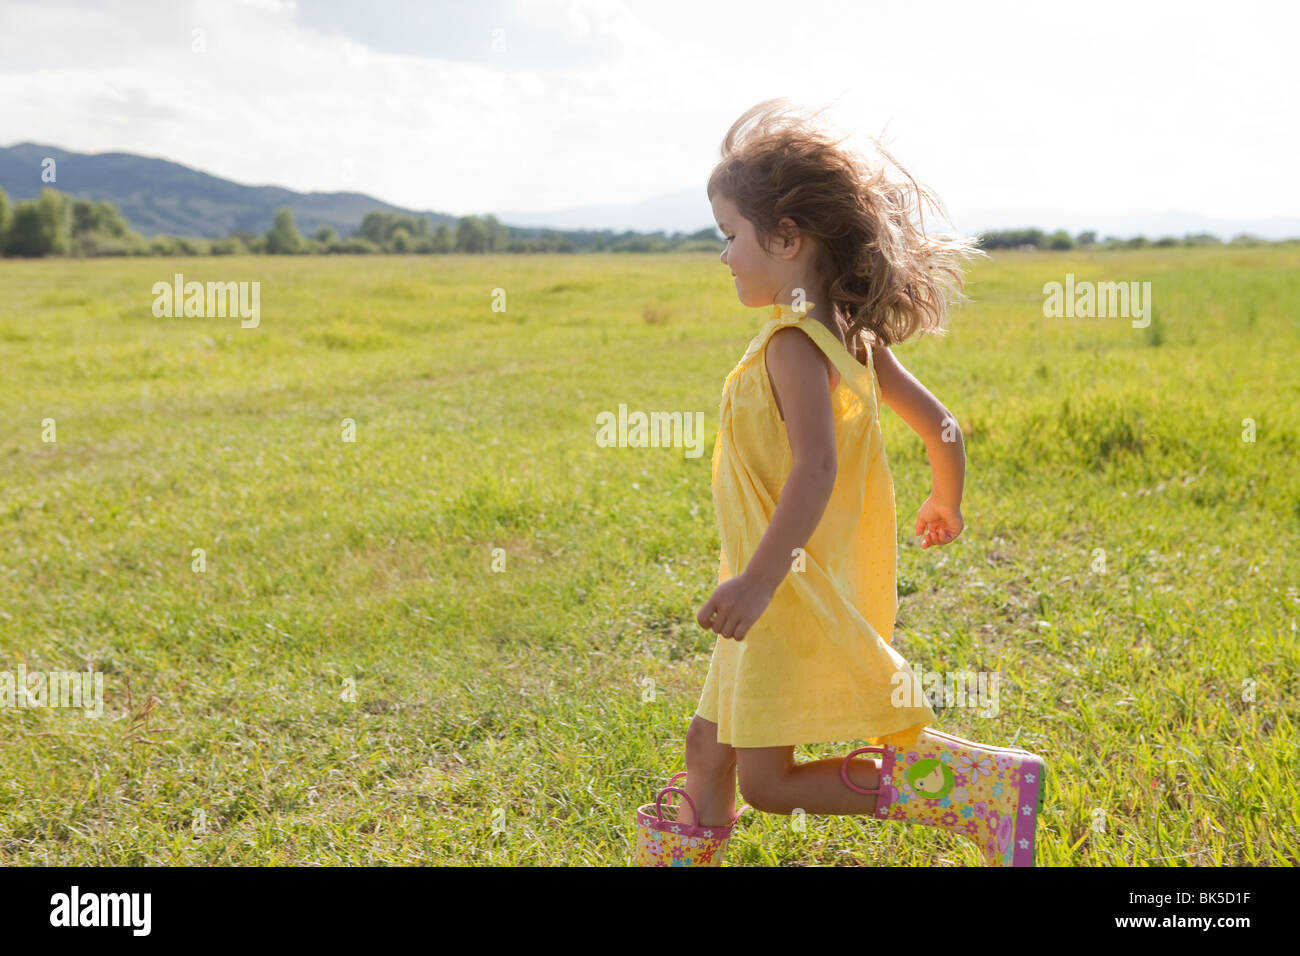 Young girl in yellow sundress running in field Stock Photo